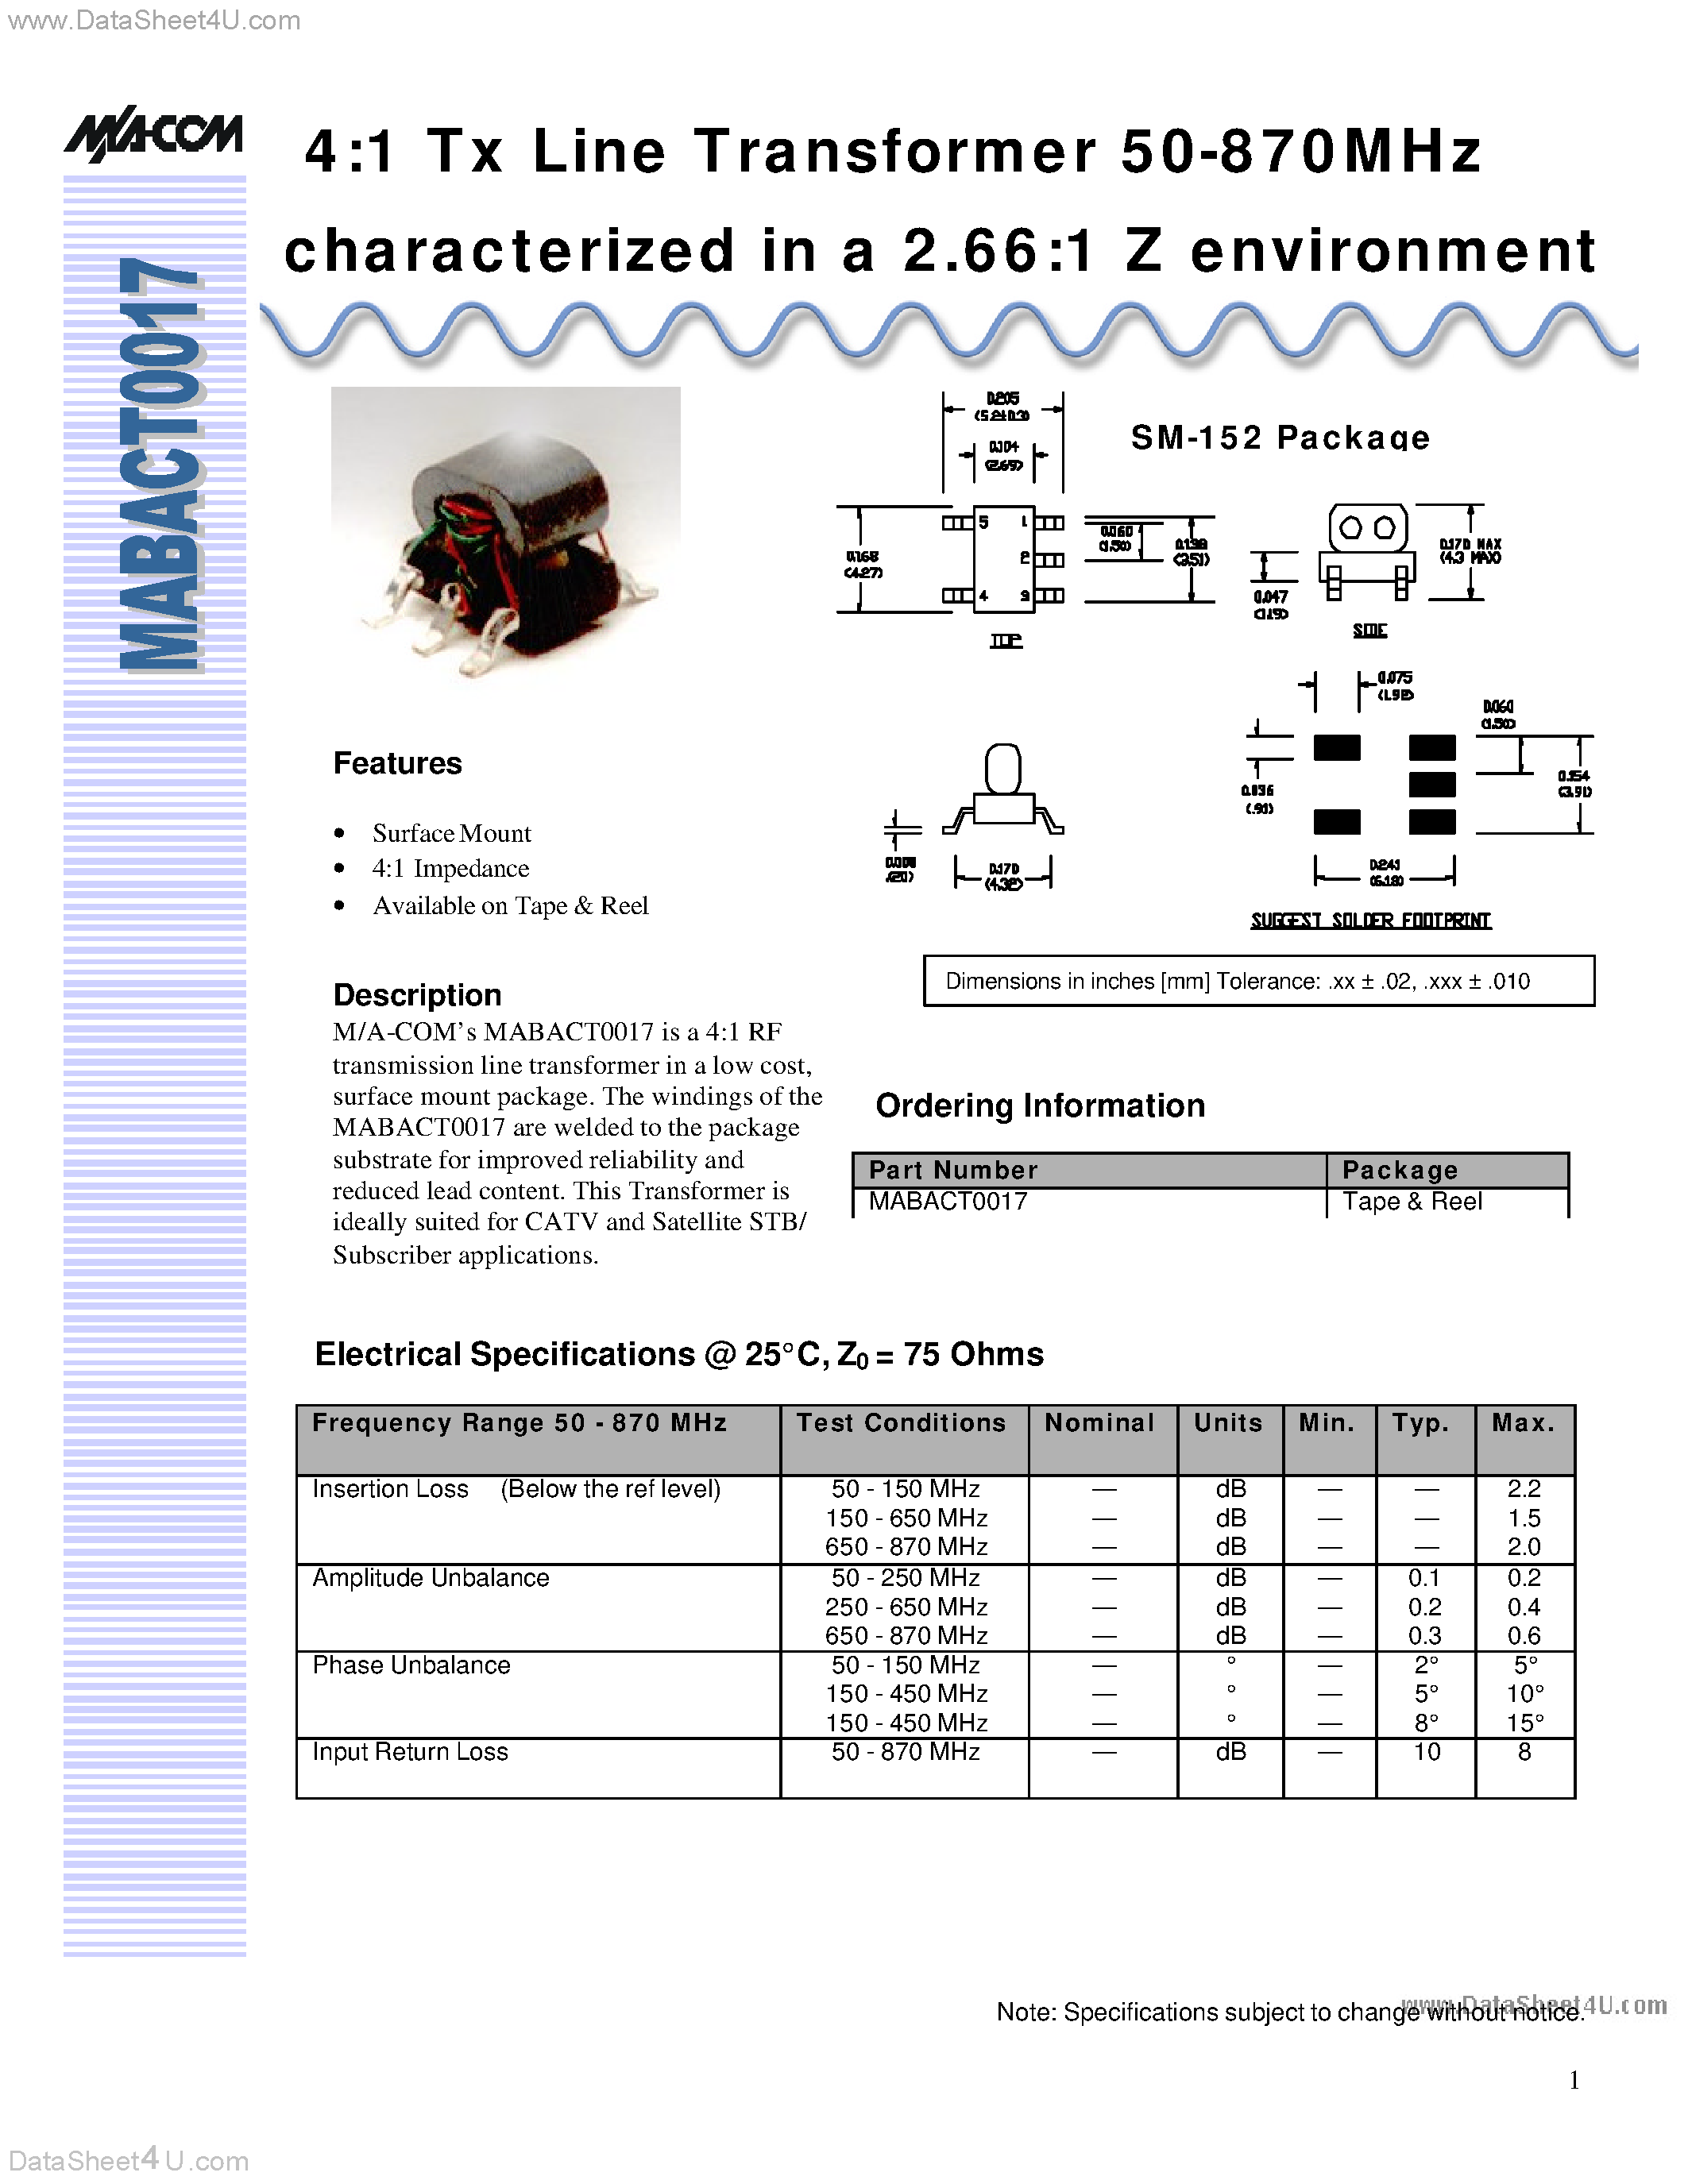 Datasheet MABACT0017 - 4:1 Tx Line Transformer 50-870MHz characterized in a 2.66:1 Z environment page 1